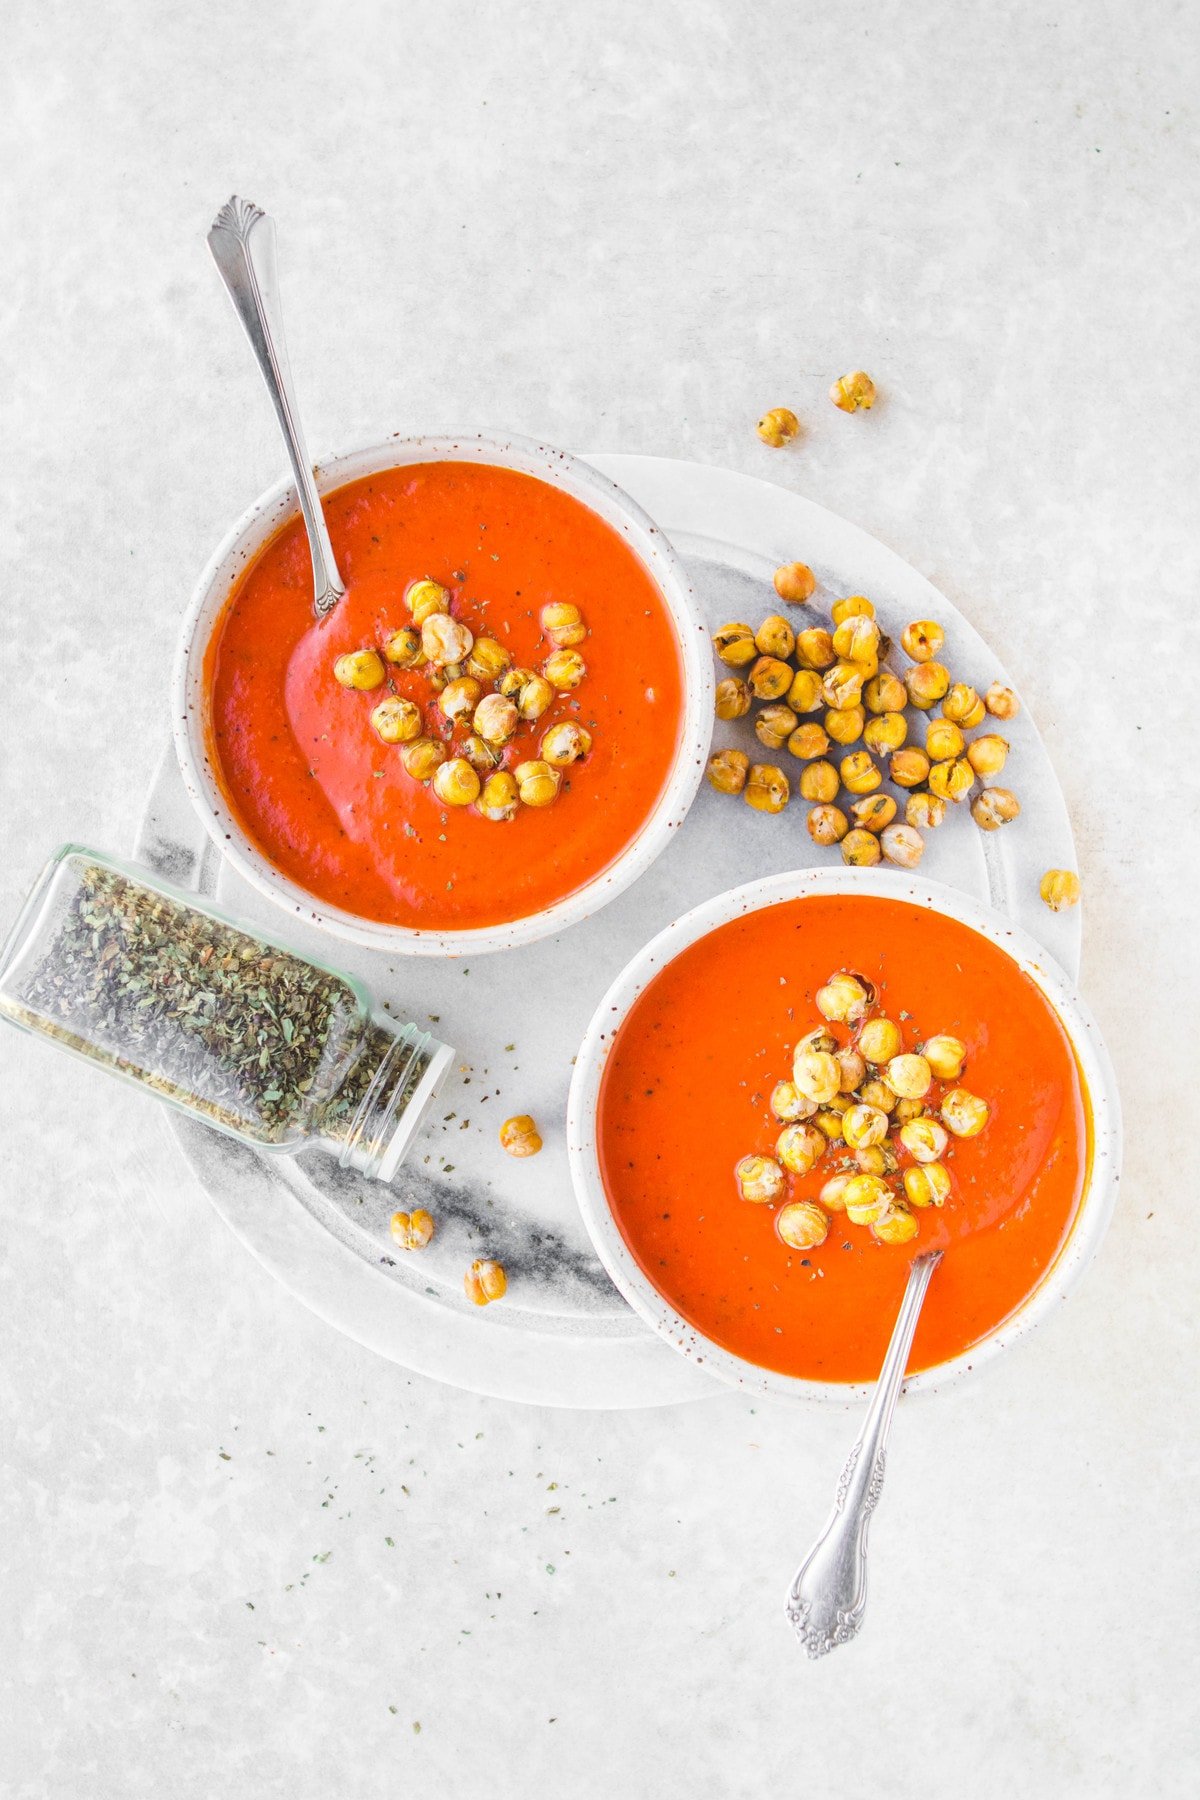 This 10 Ingredient Vegan Tomato & Red Pepper Soup is an easy weeknight dinner and perfect for meal prep! #vegan #mealprep #plantbased #tomatosoup #glutenfree #oilfree